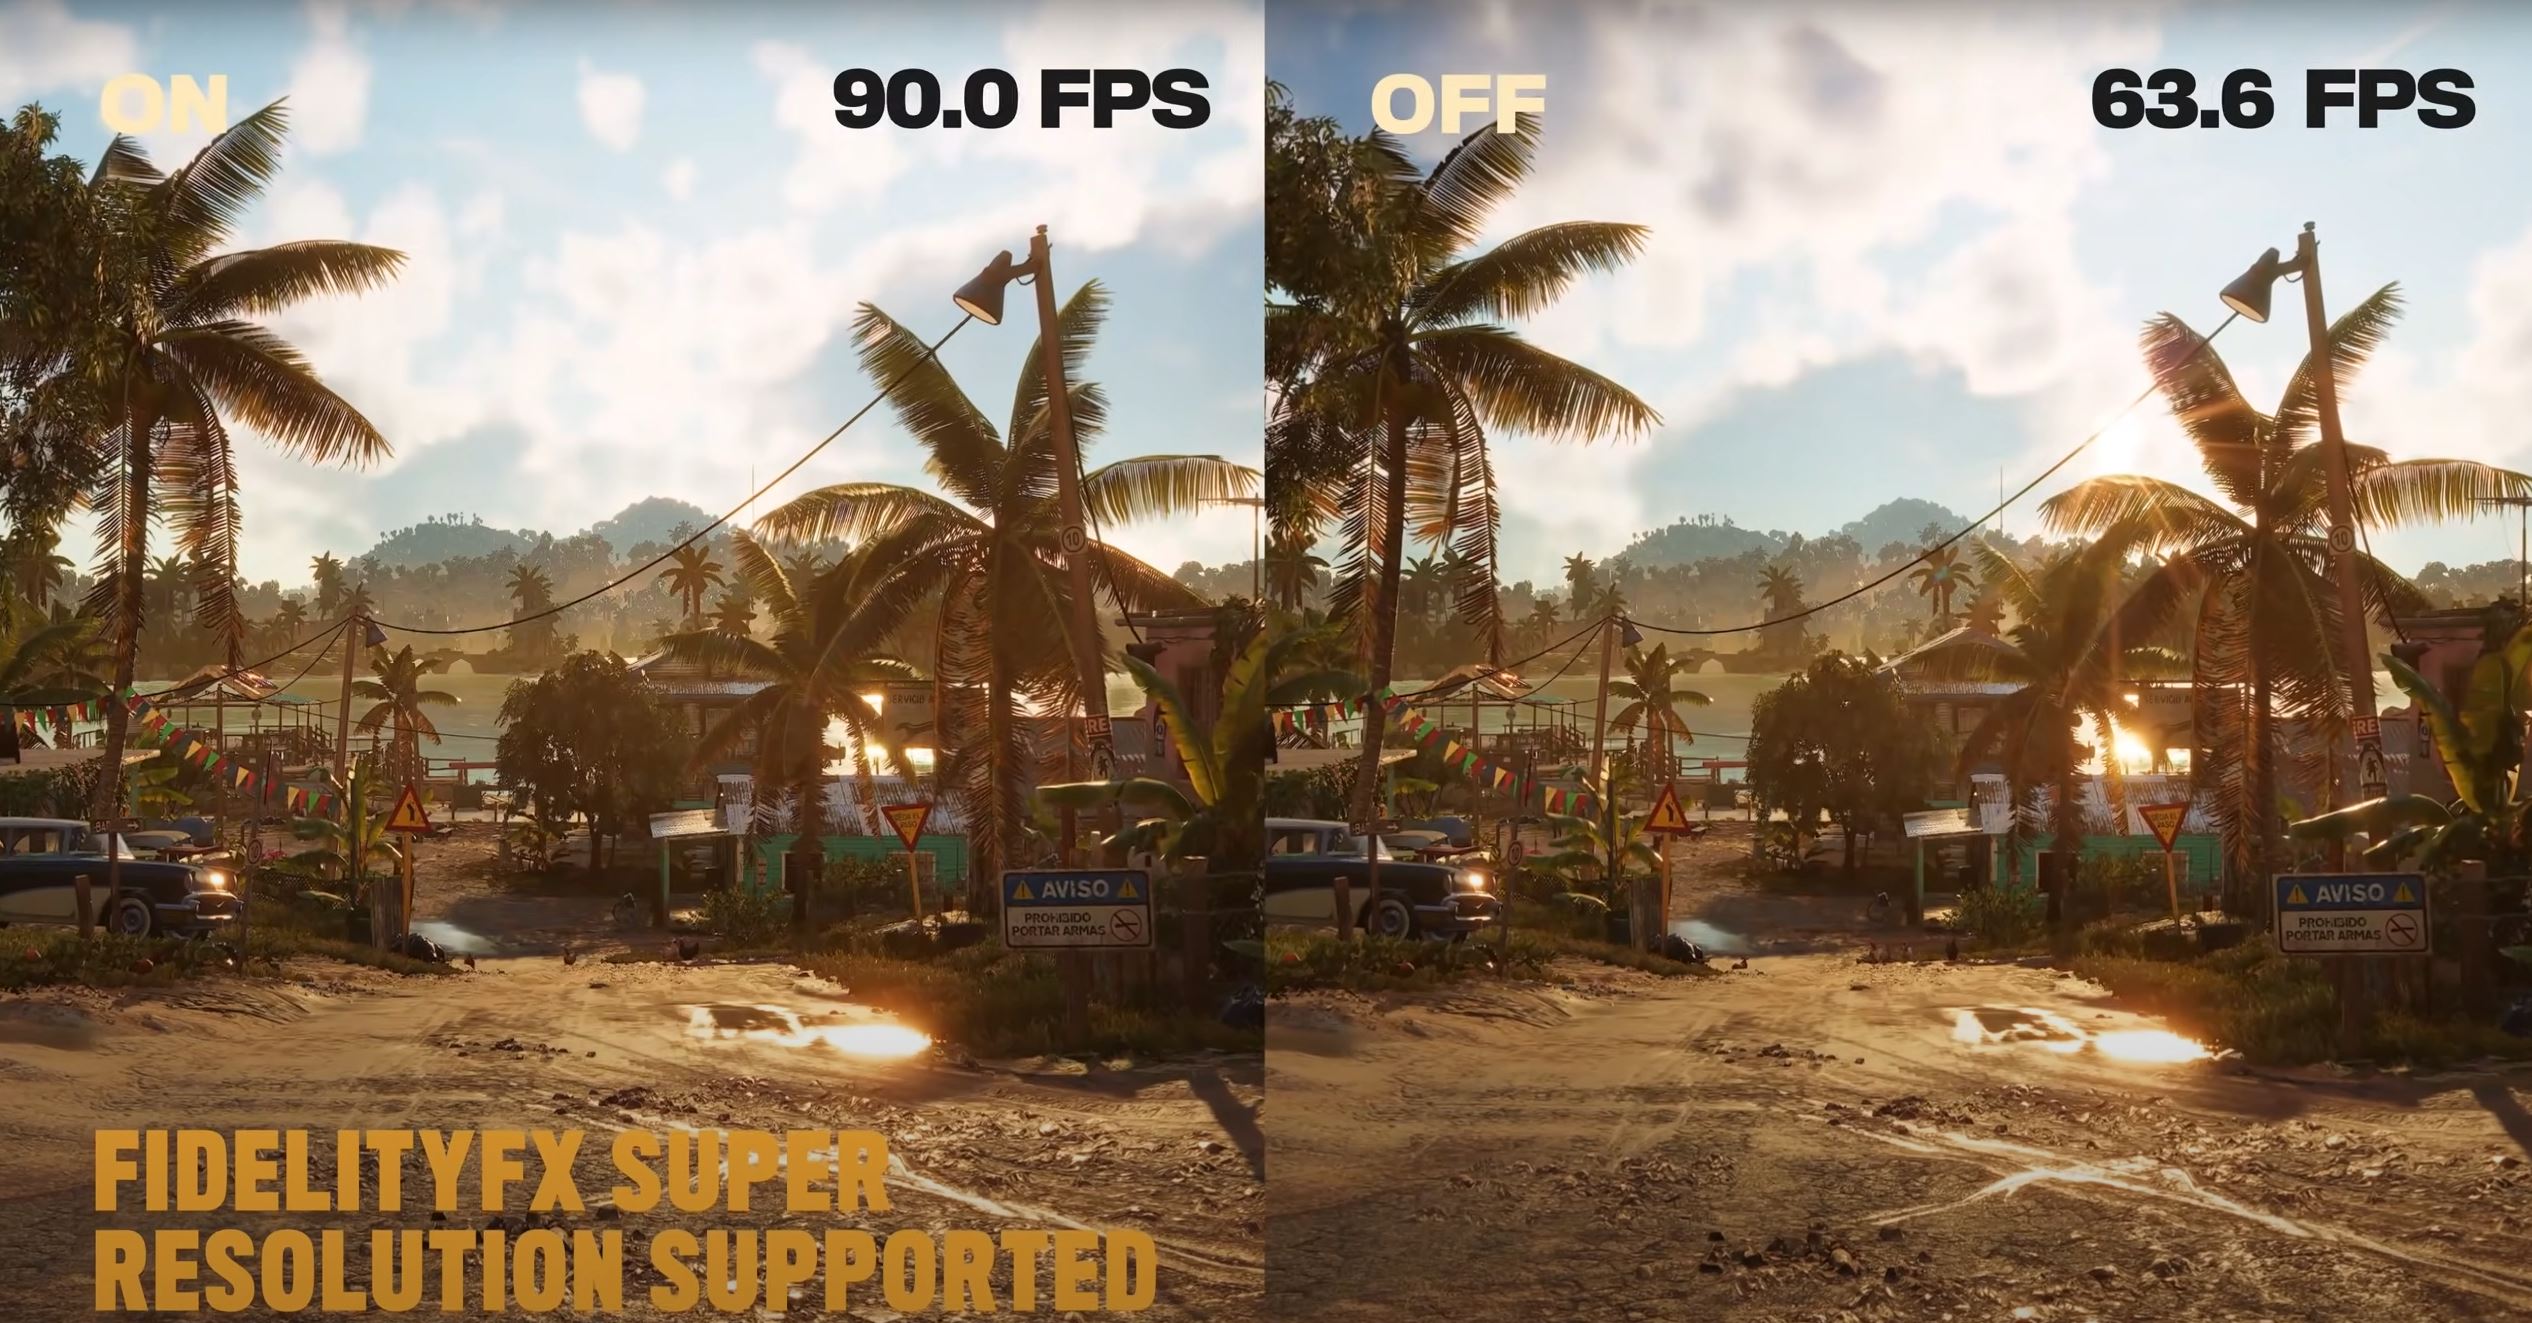 Is FAR CRY 6 able to CROSSPLAY on LUNA? 